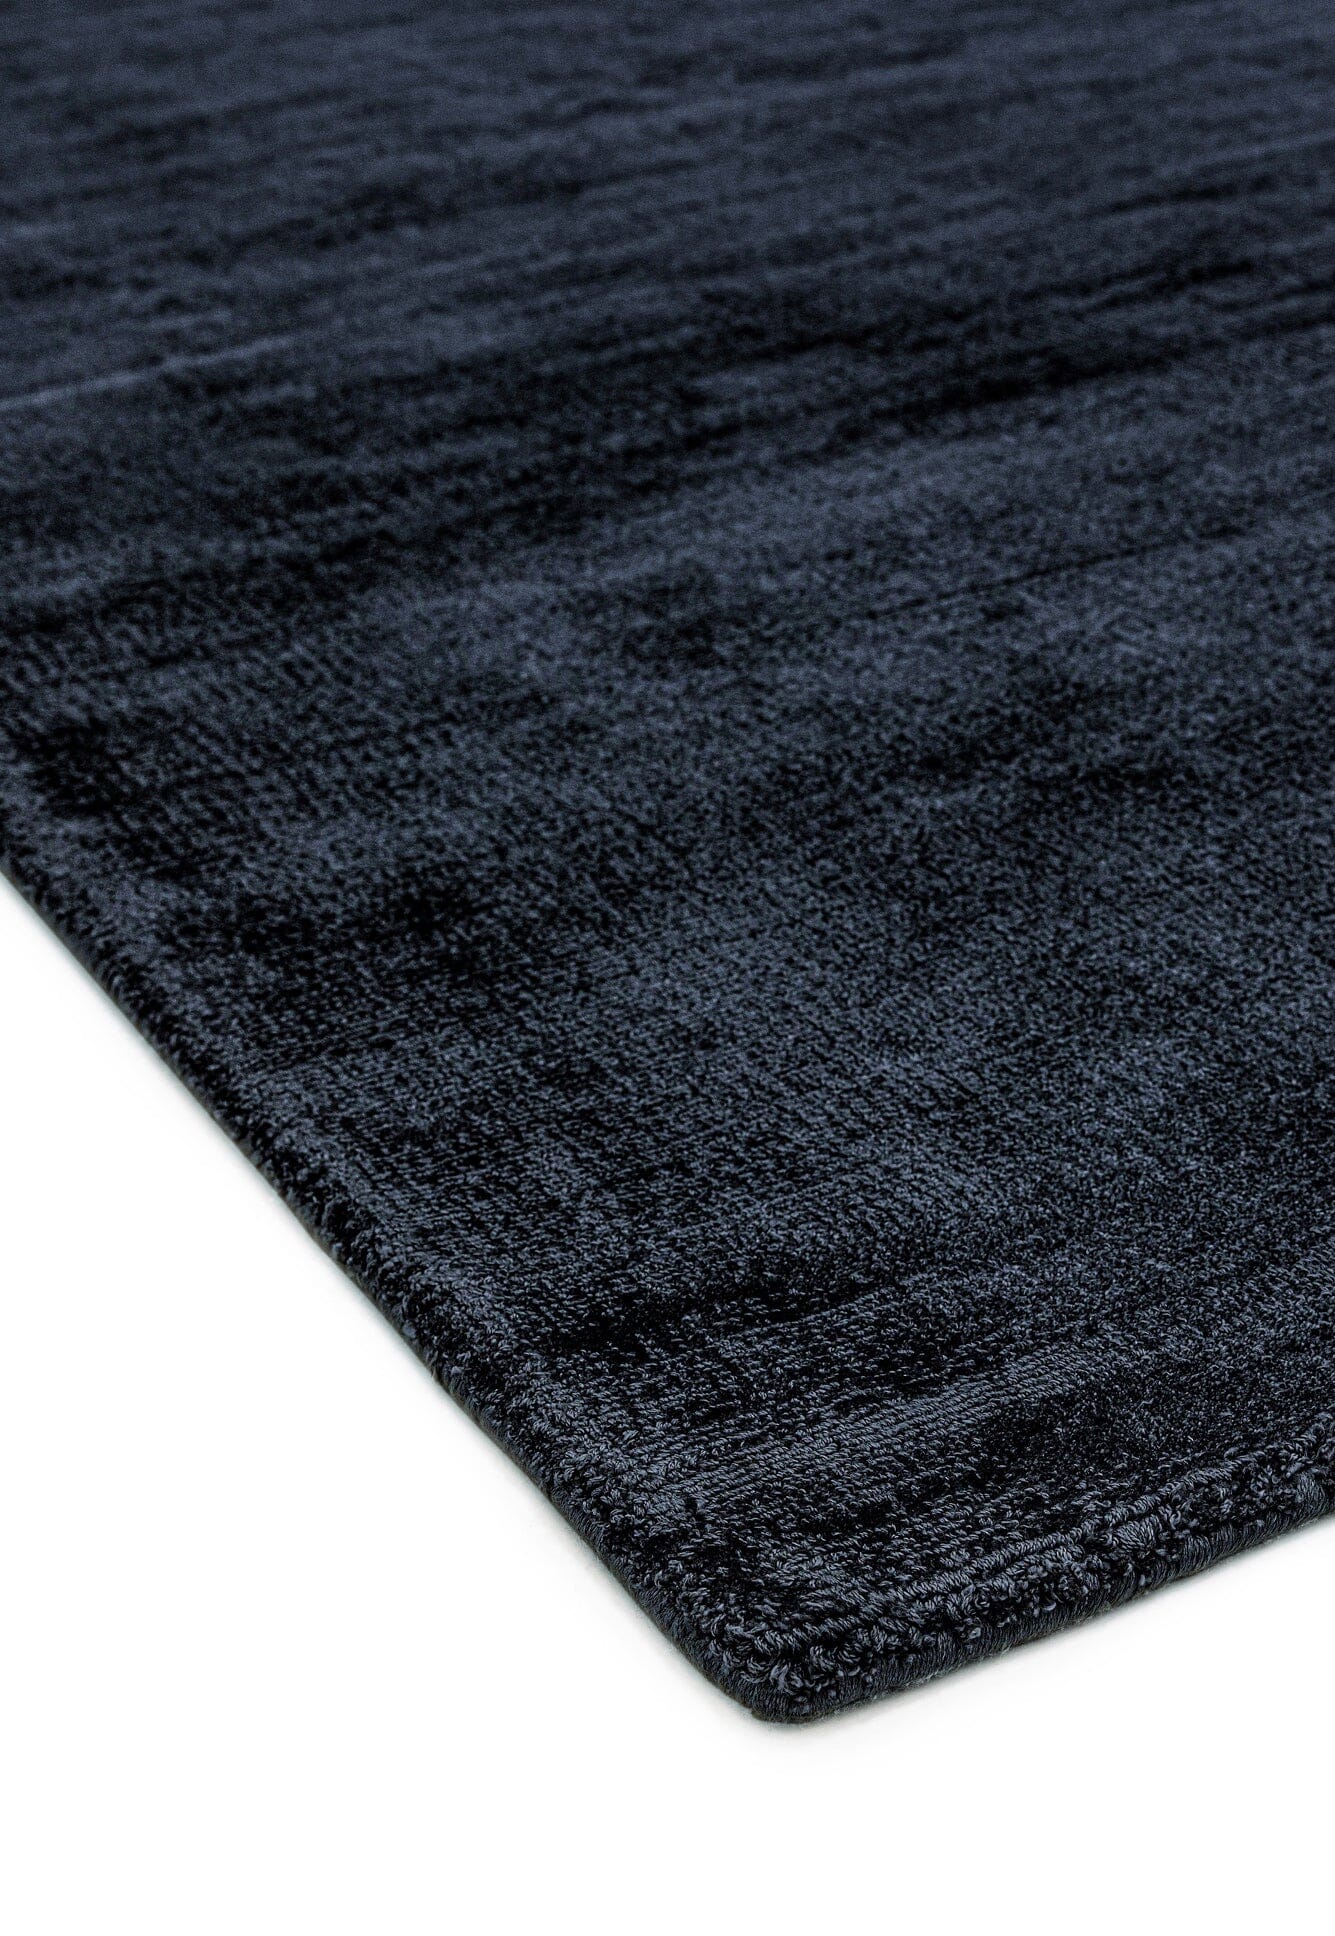 Asiatic Carpets Blade Hand Woven Rug Navy - 120 x 170cm